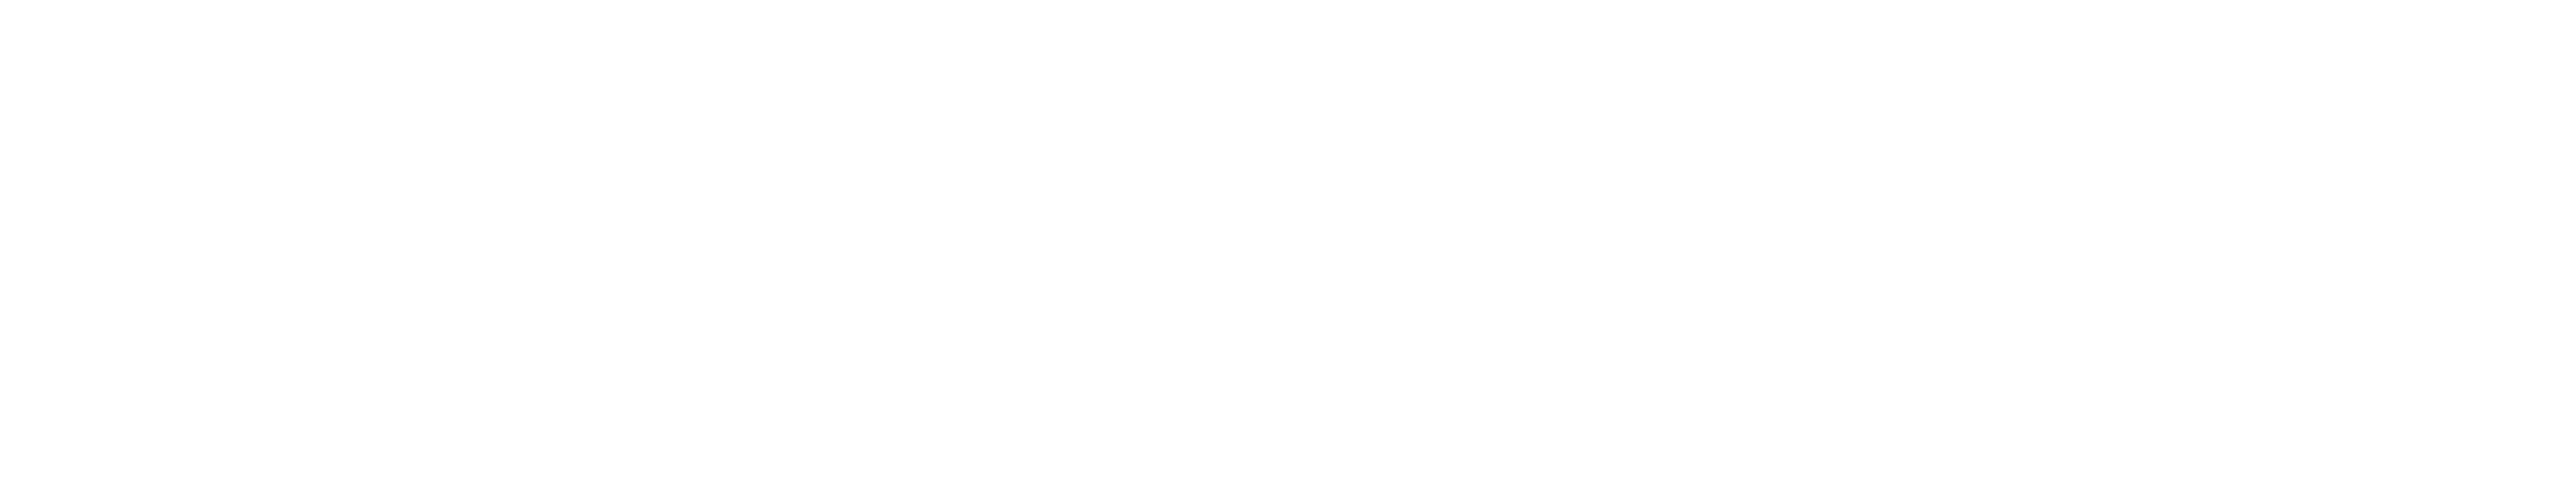 logo for UPLIFT - Women’s Health Collective